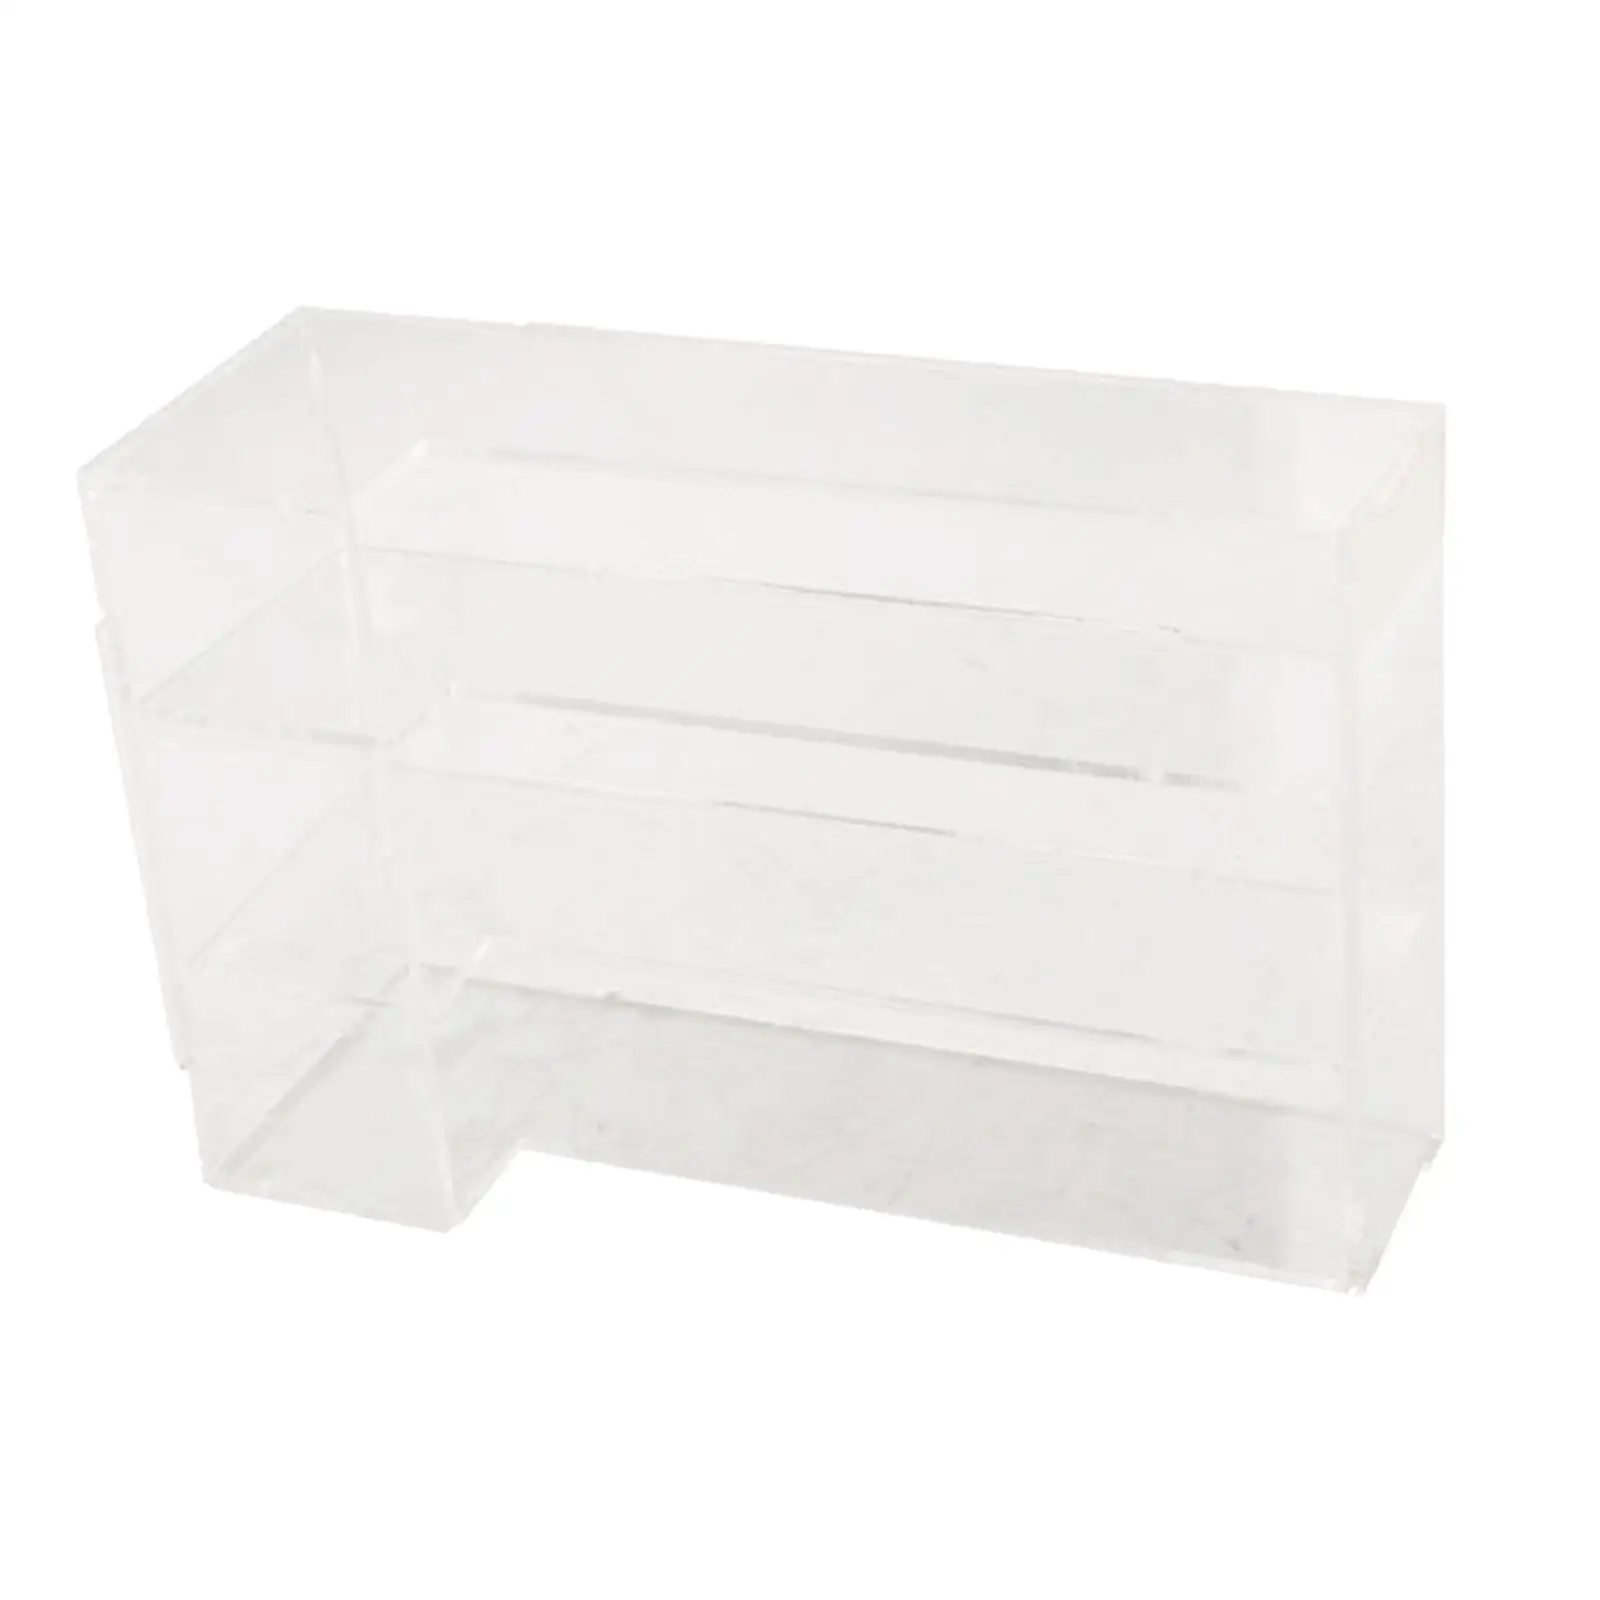 Miniature Store Acrylic Display Cabinet 1/12 Miniature Bakery Display Case for Diorama Kids Pretend Play Photography Props